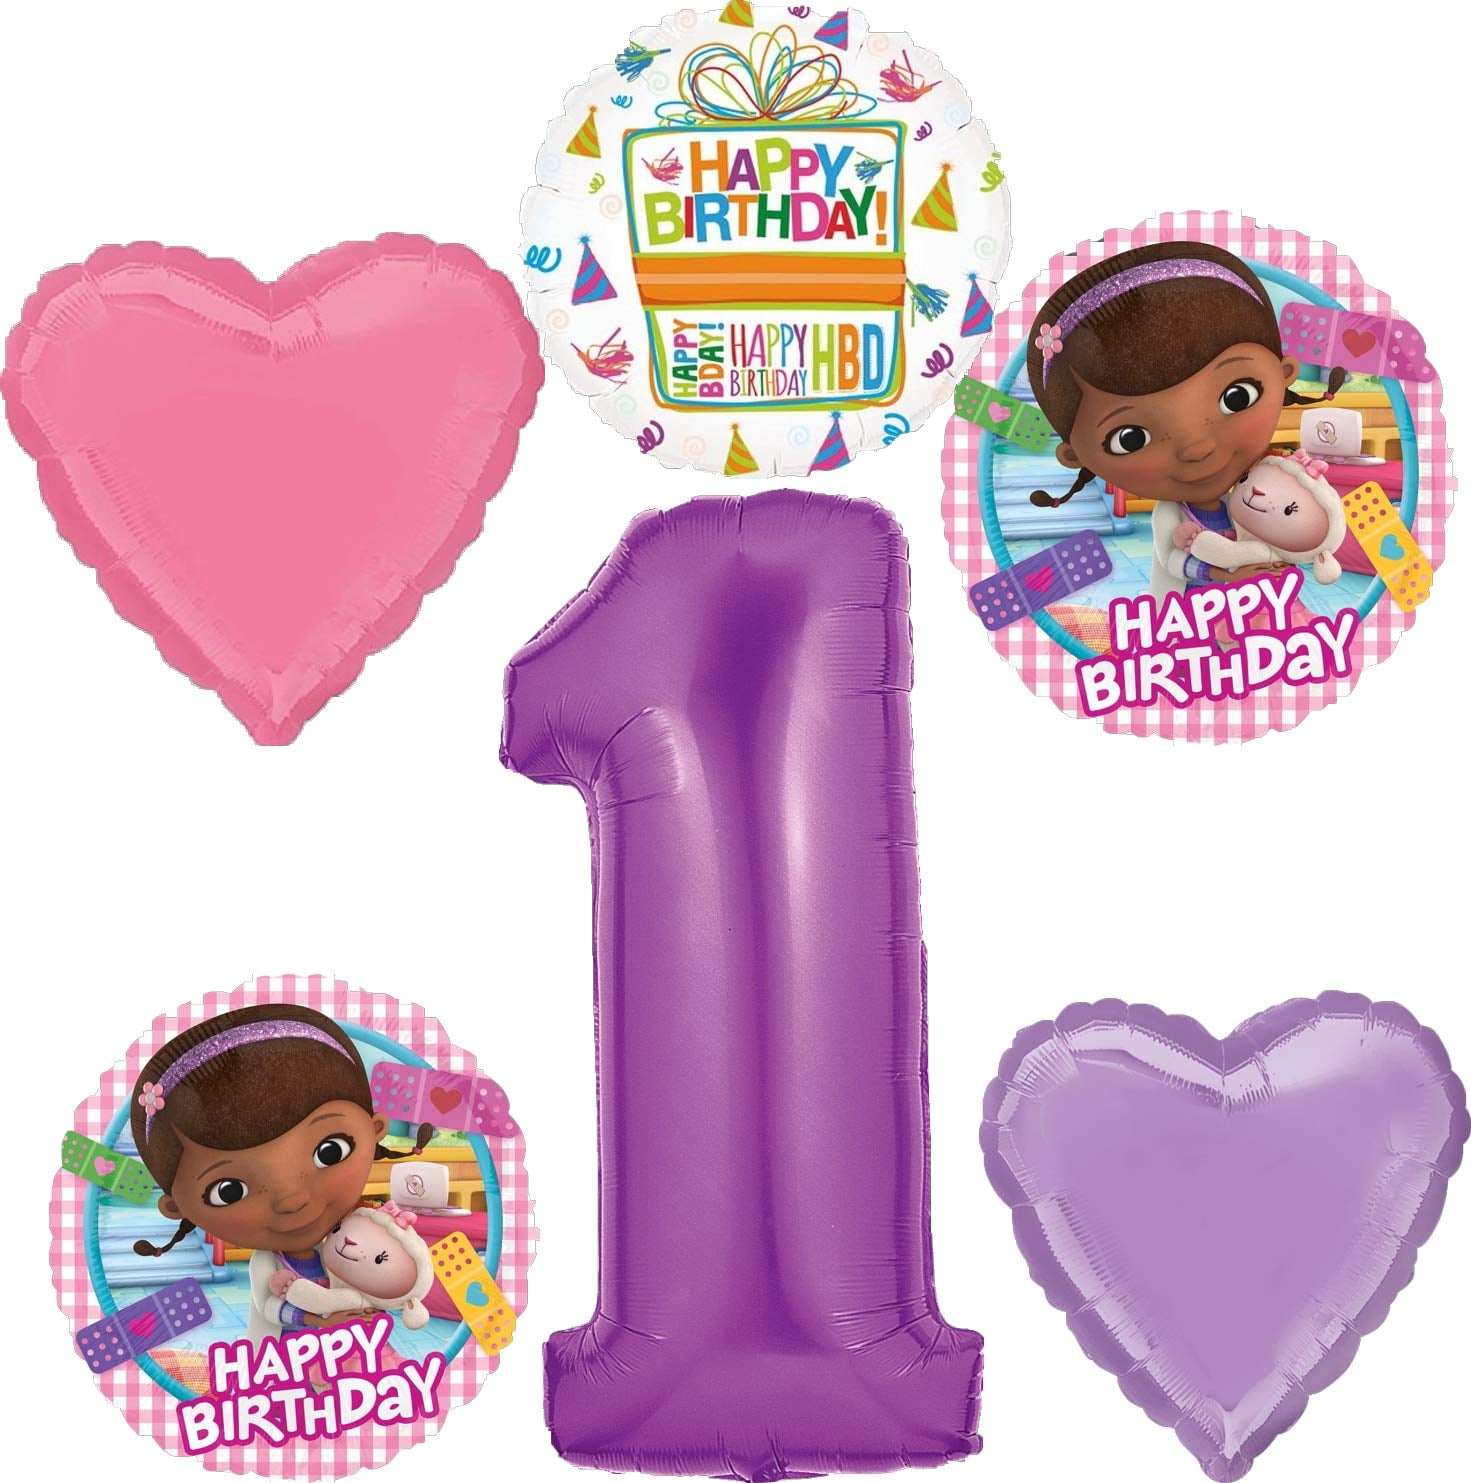 2 Bags of 8 COUNTS Doc McStuffins Birthday Party Blowouts Toy for Party 